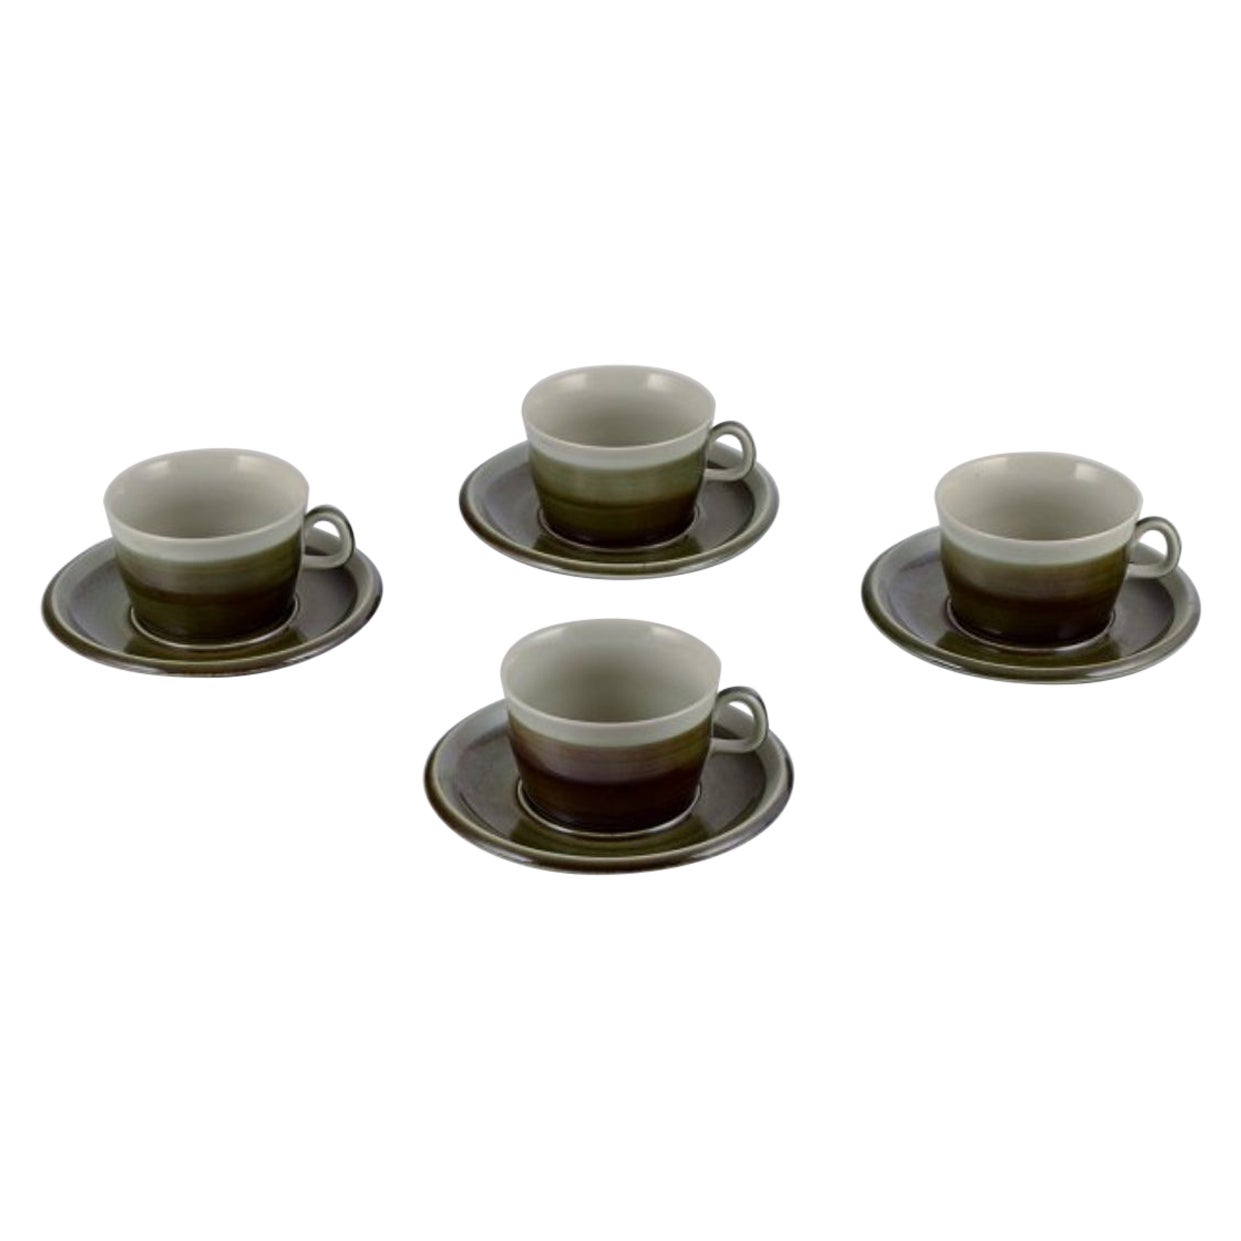 Marianne Westman for Rörstrand. "Maya" series. Four coffee cups and saucers. 